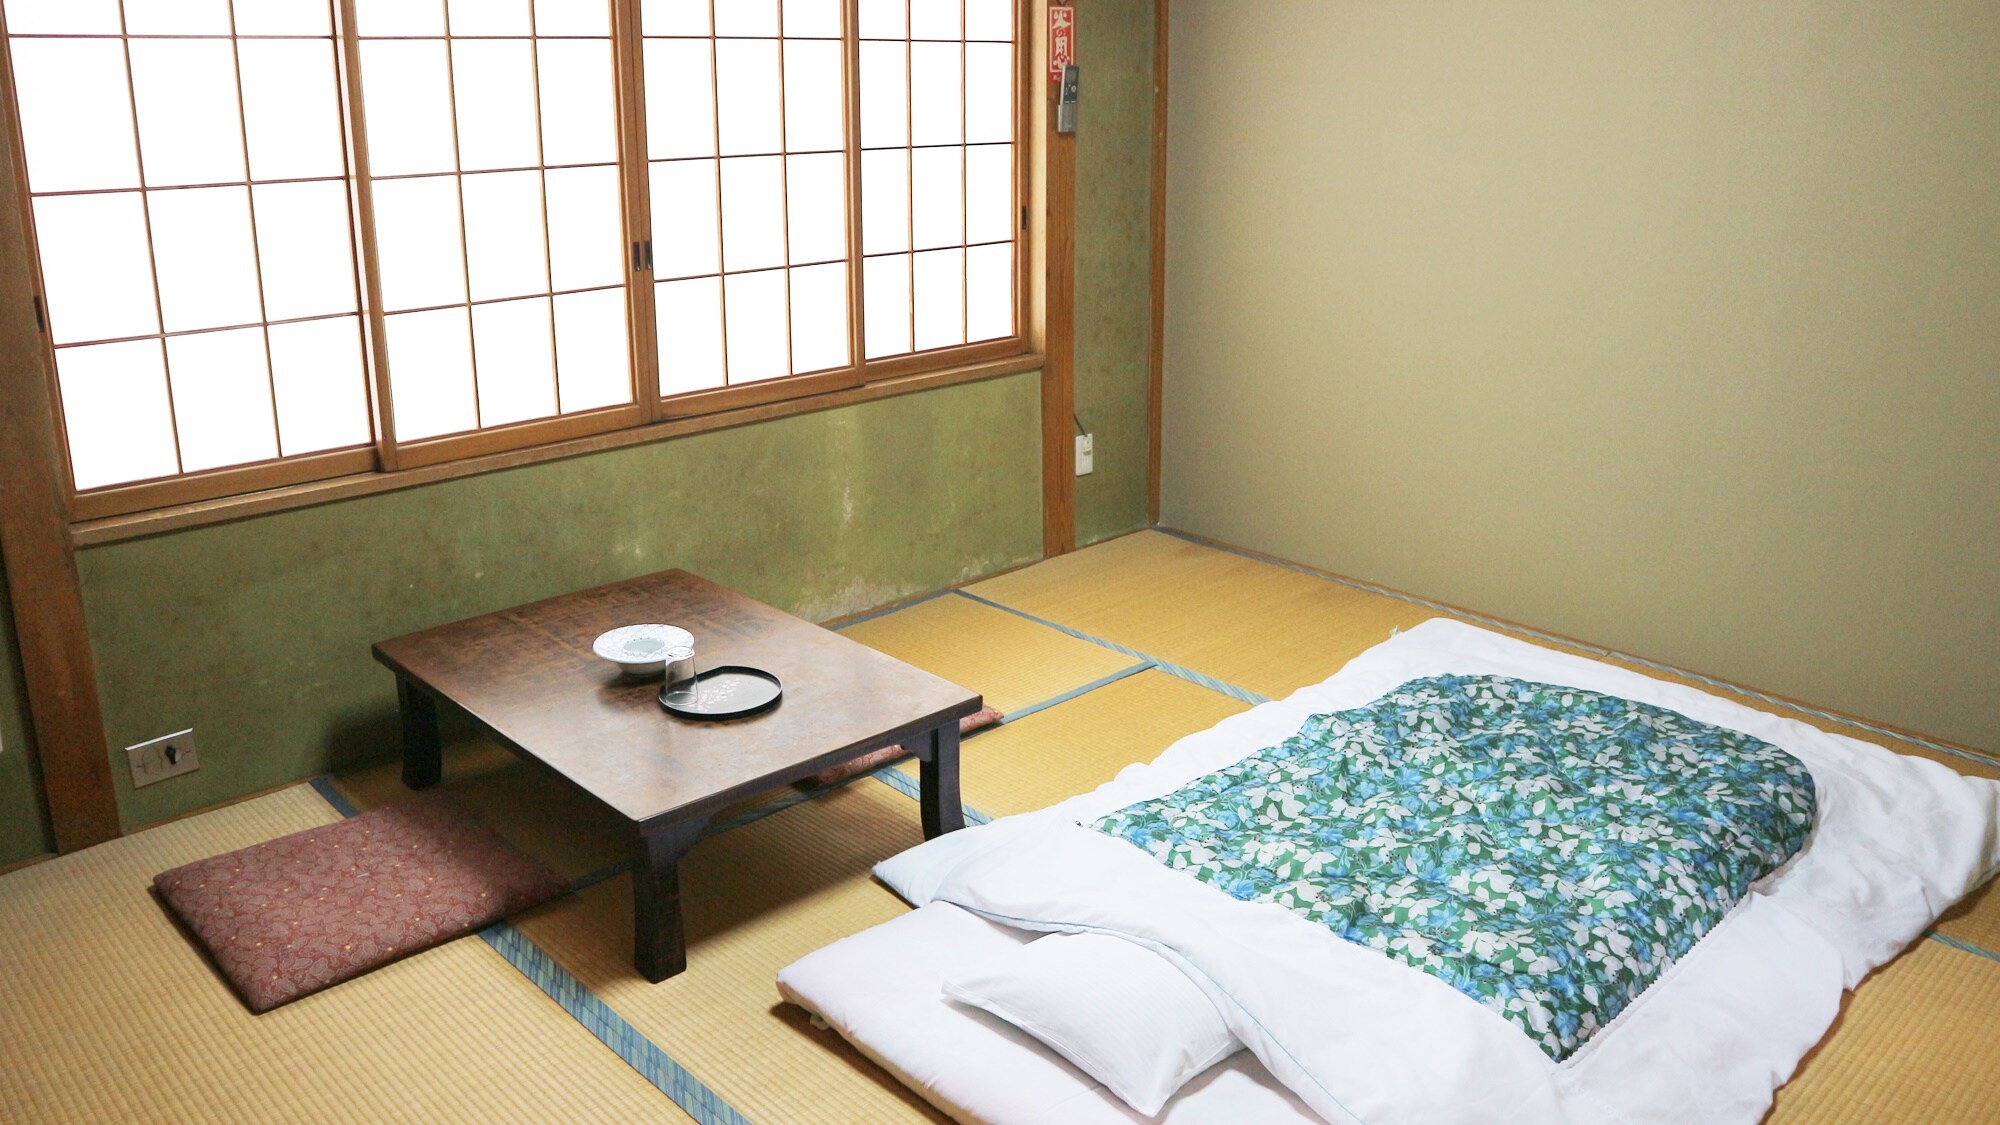 * One example of Japanese-style room / Welcome for consecutive nights! You can bring your own manga! Please enjoy during your stay!